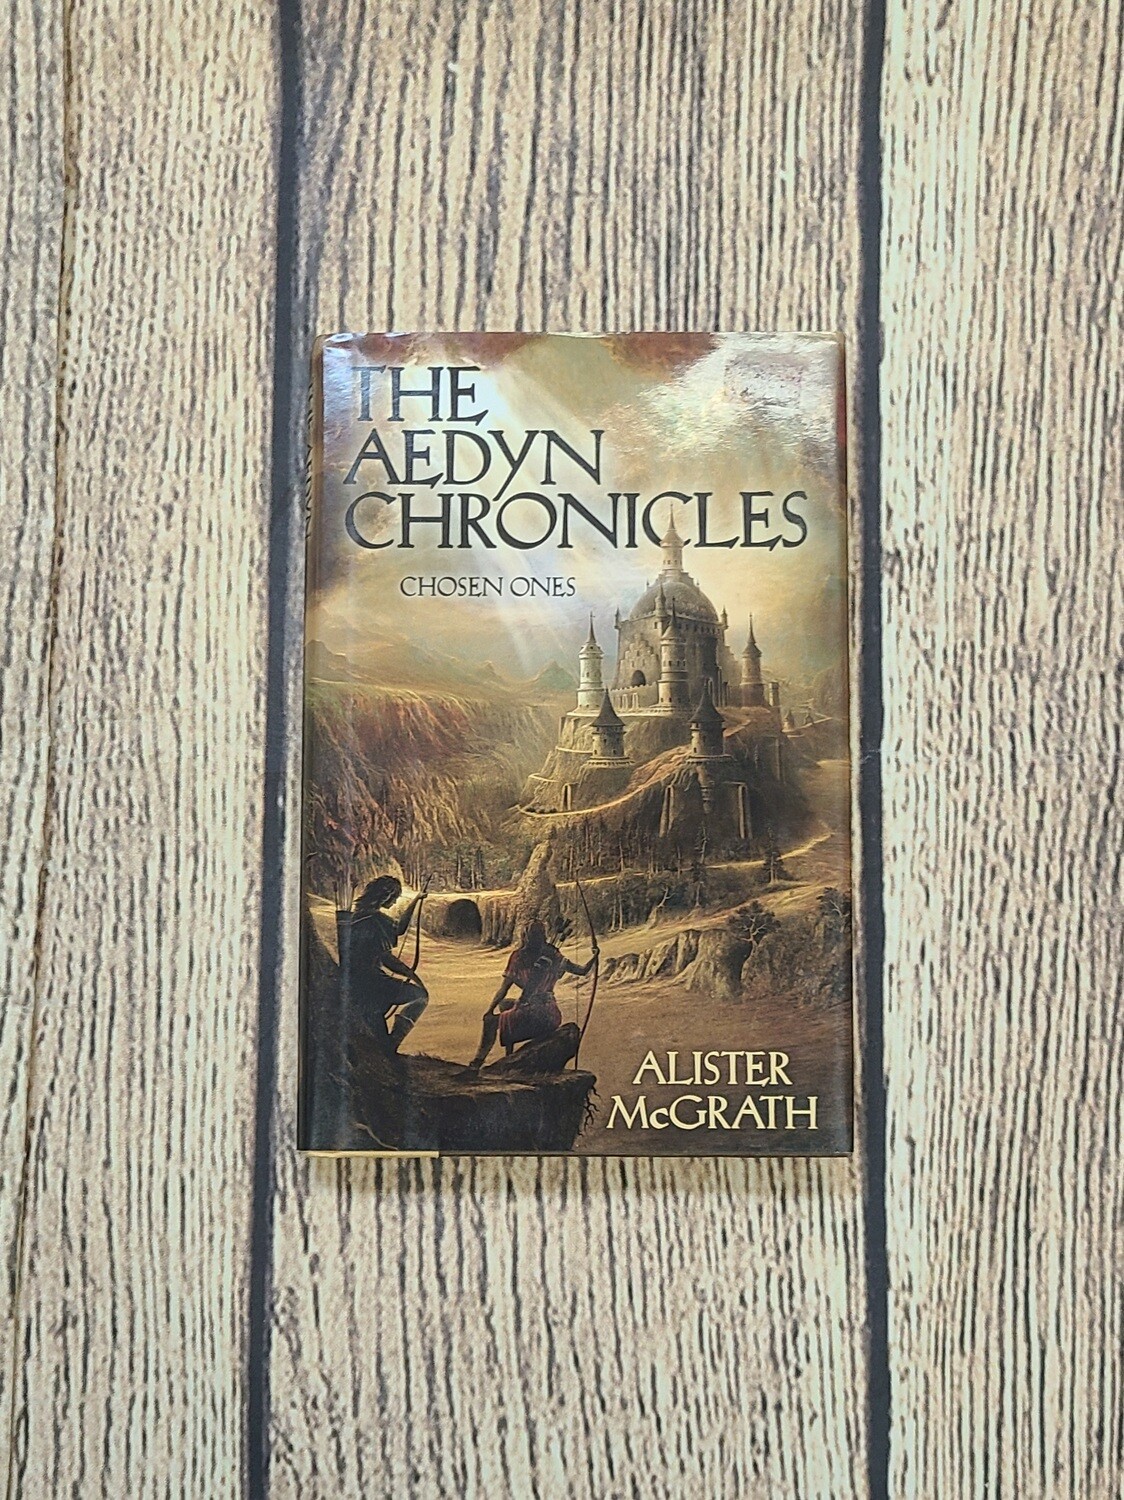 The Aedyn Chronicles: Chosen Ones by Alister McGrath